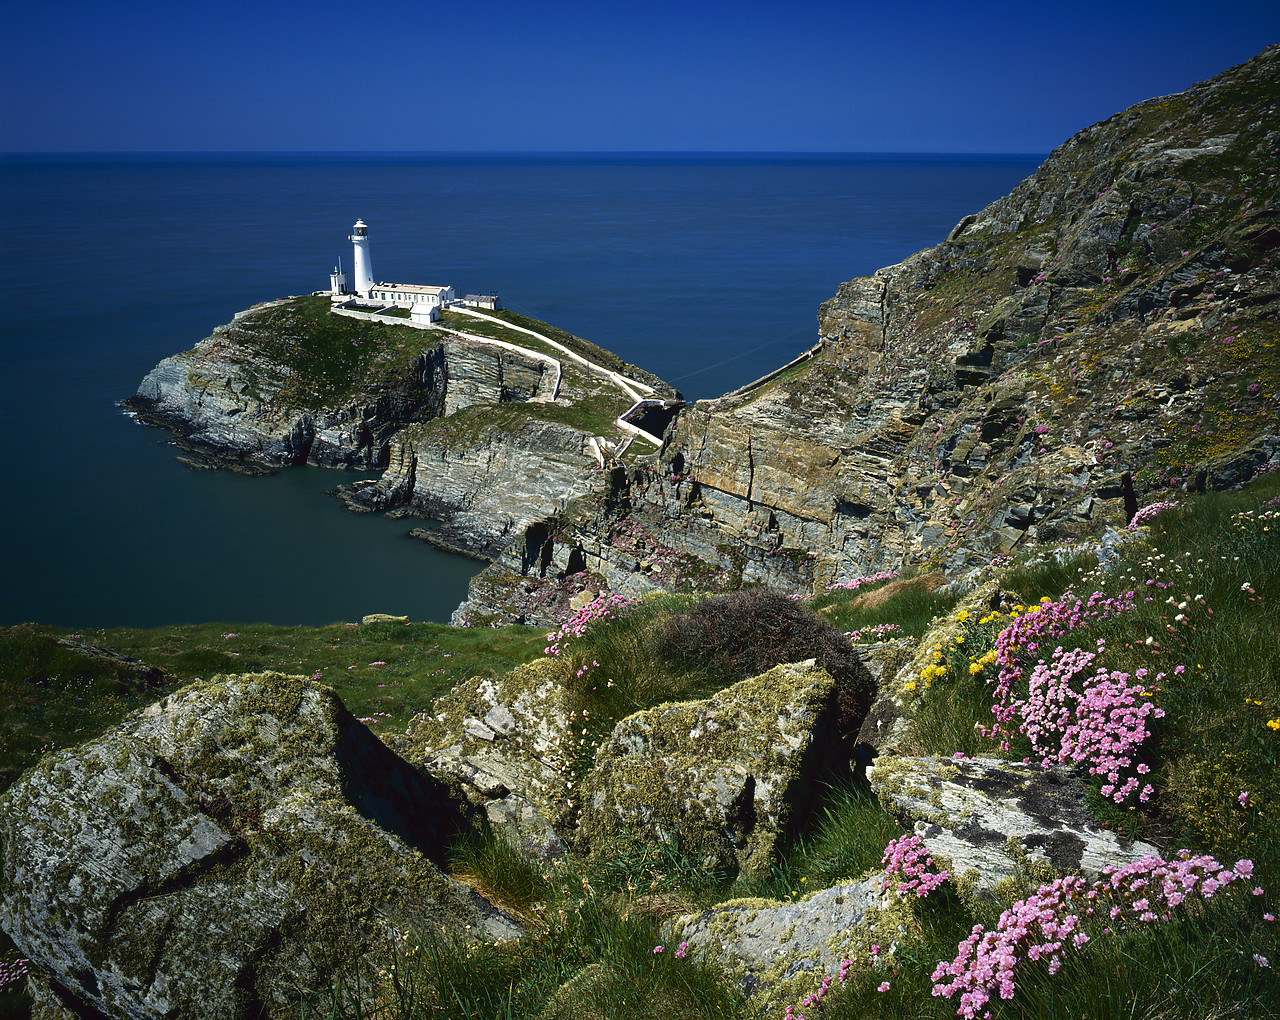 #881338-1 - South Stack Lighthouse, Anglesey, Wales